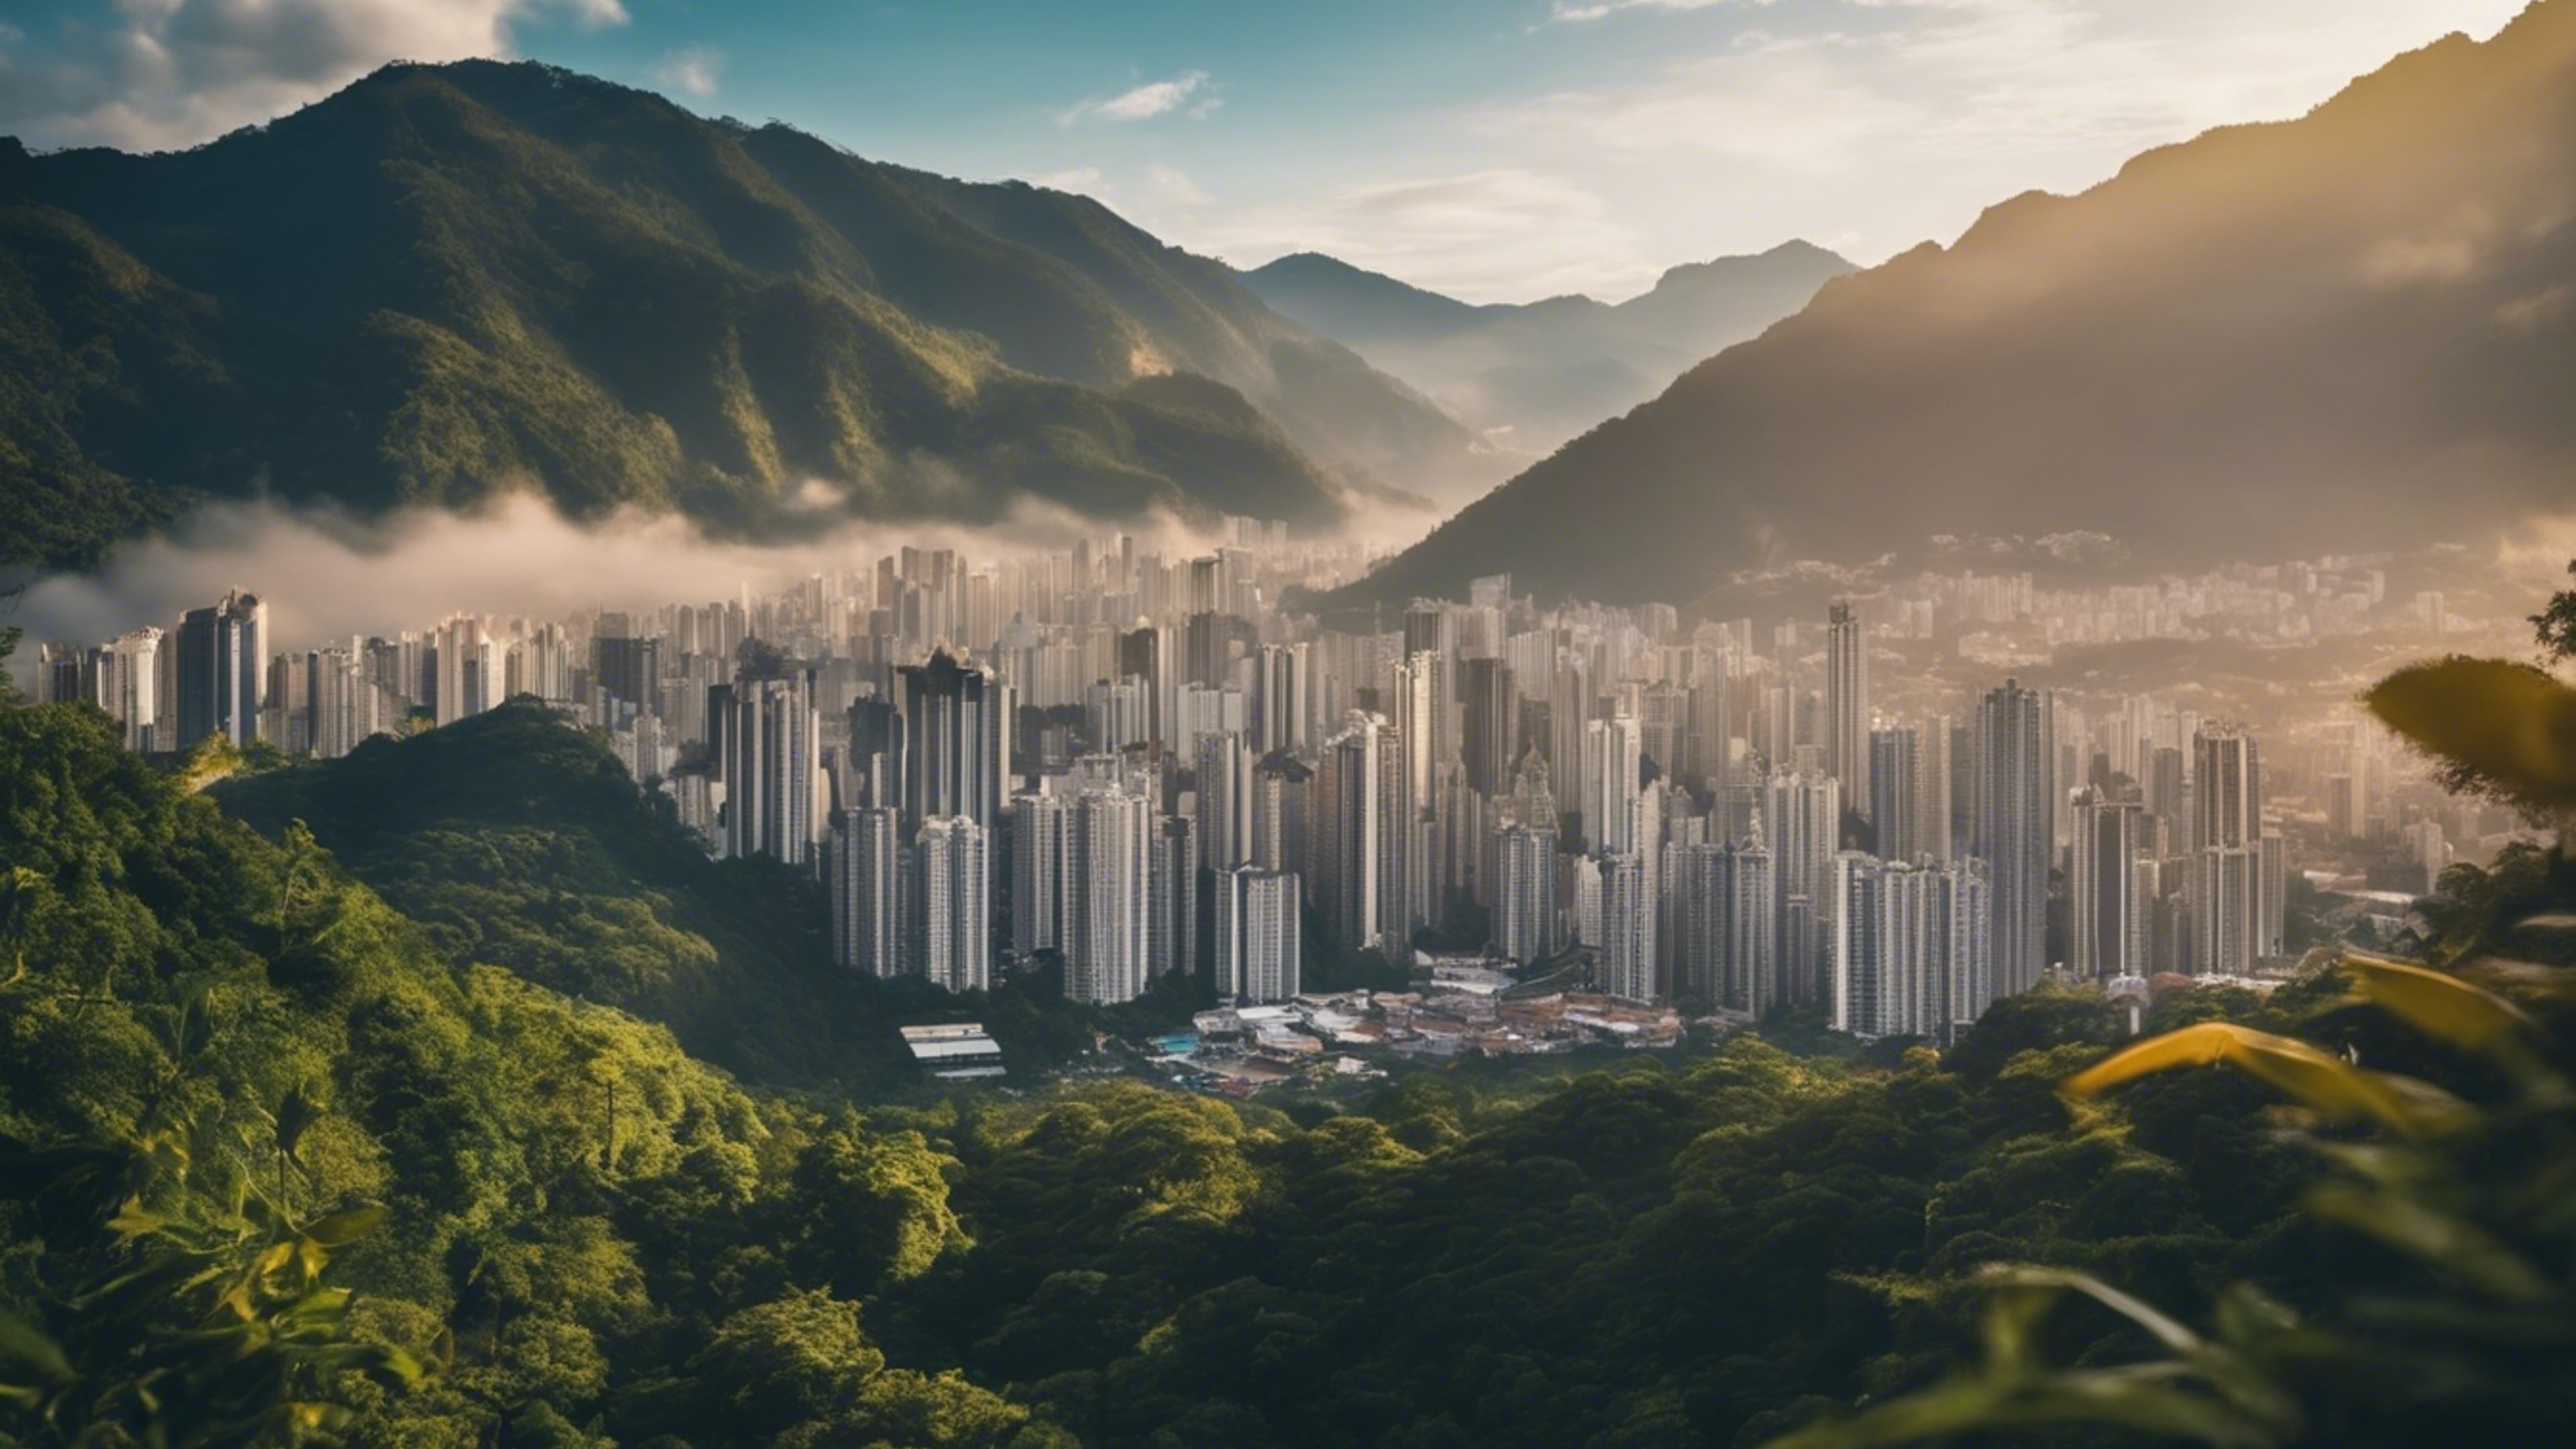 The enchanting skyline of a mountain range rainforest city in the heart of nature.壁紙[97852b95a374431baf05]